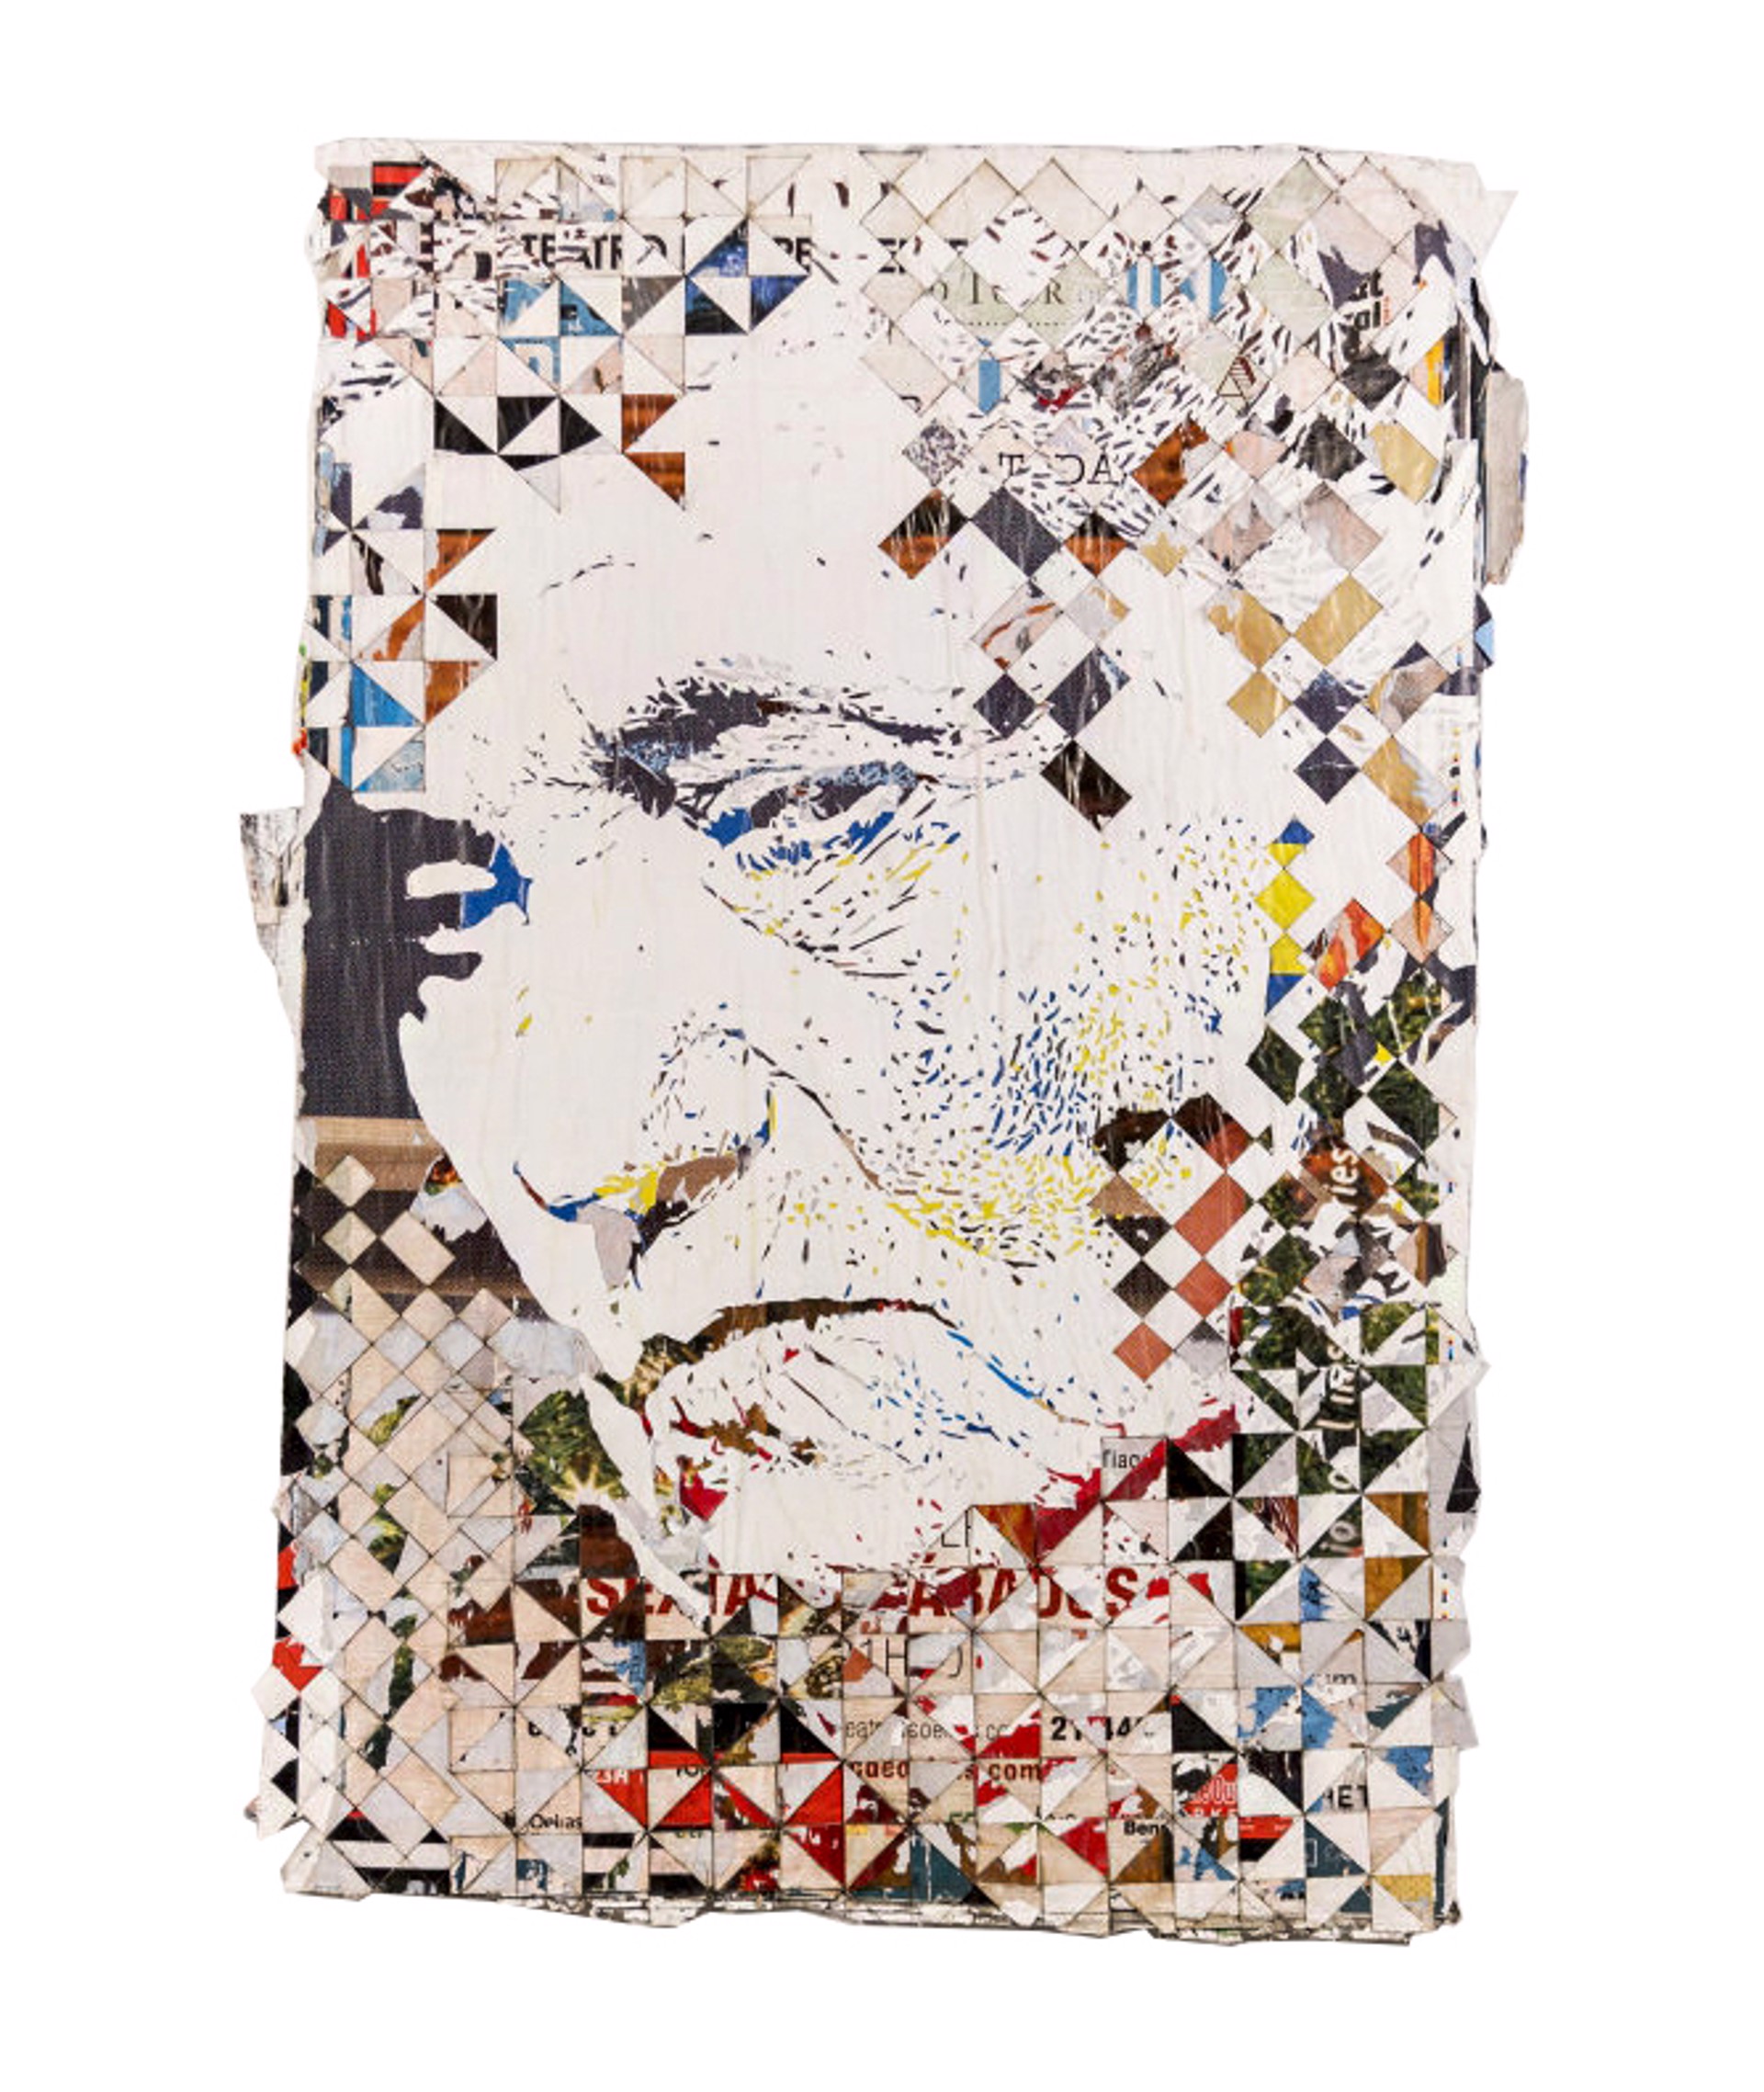 Dicey Series #20 by Vhils